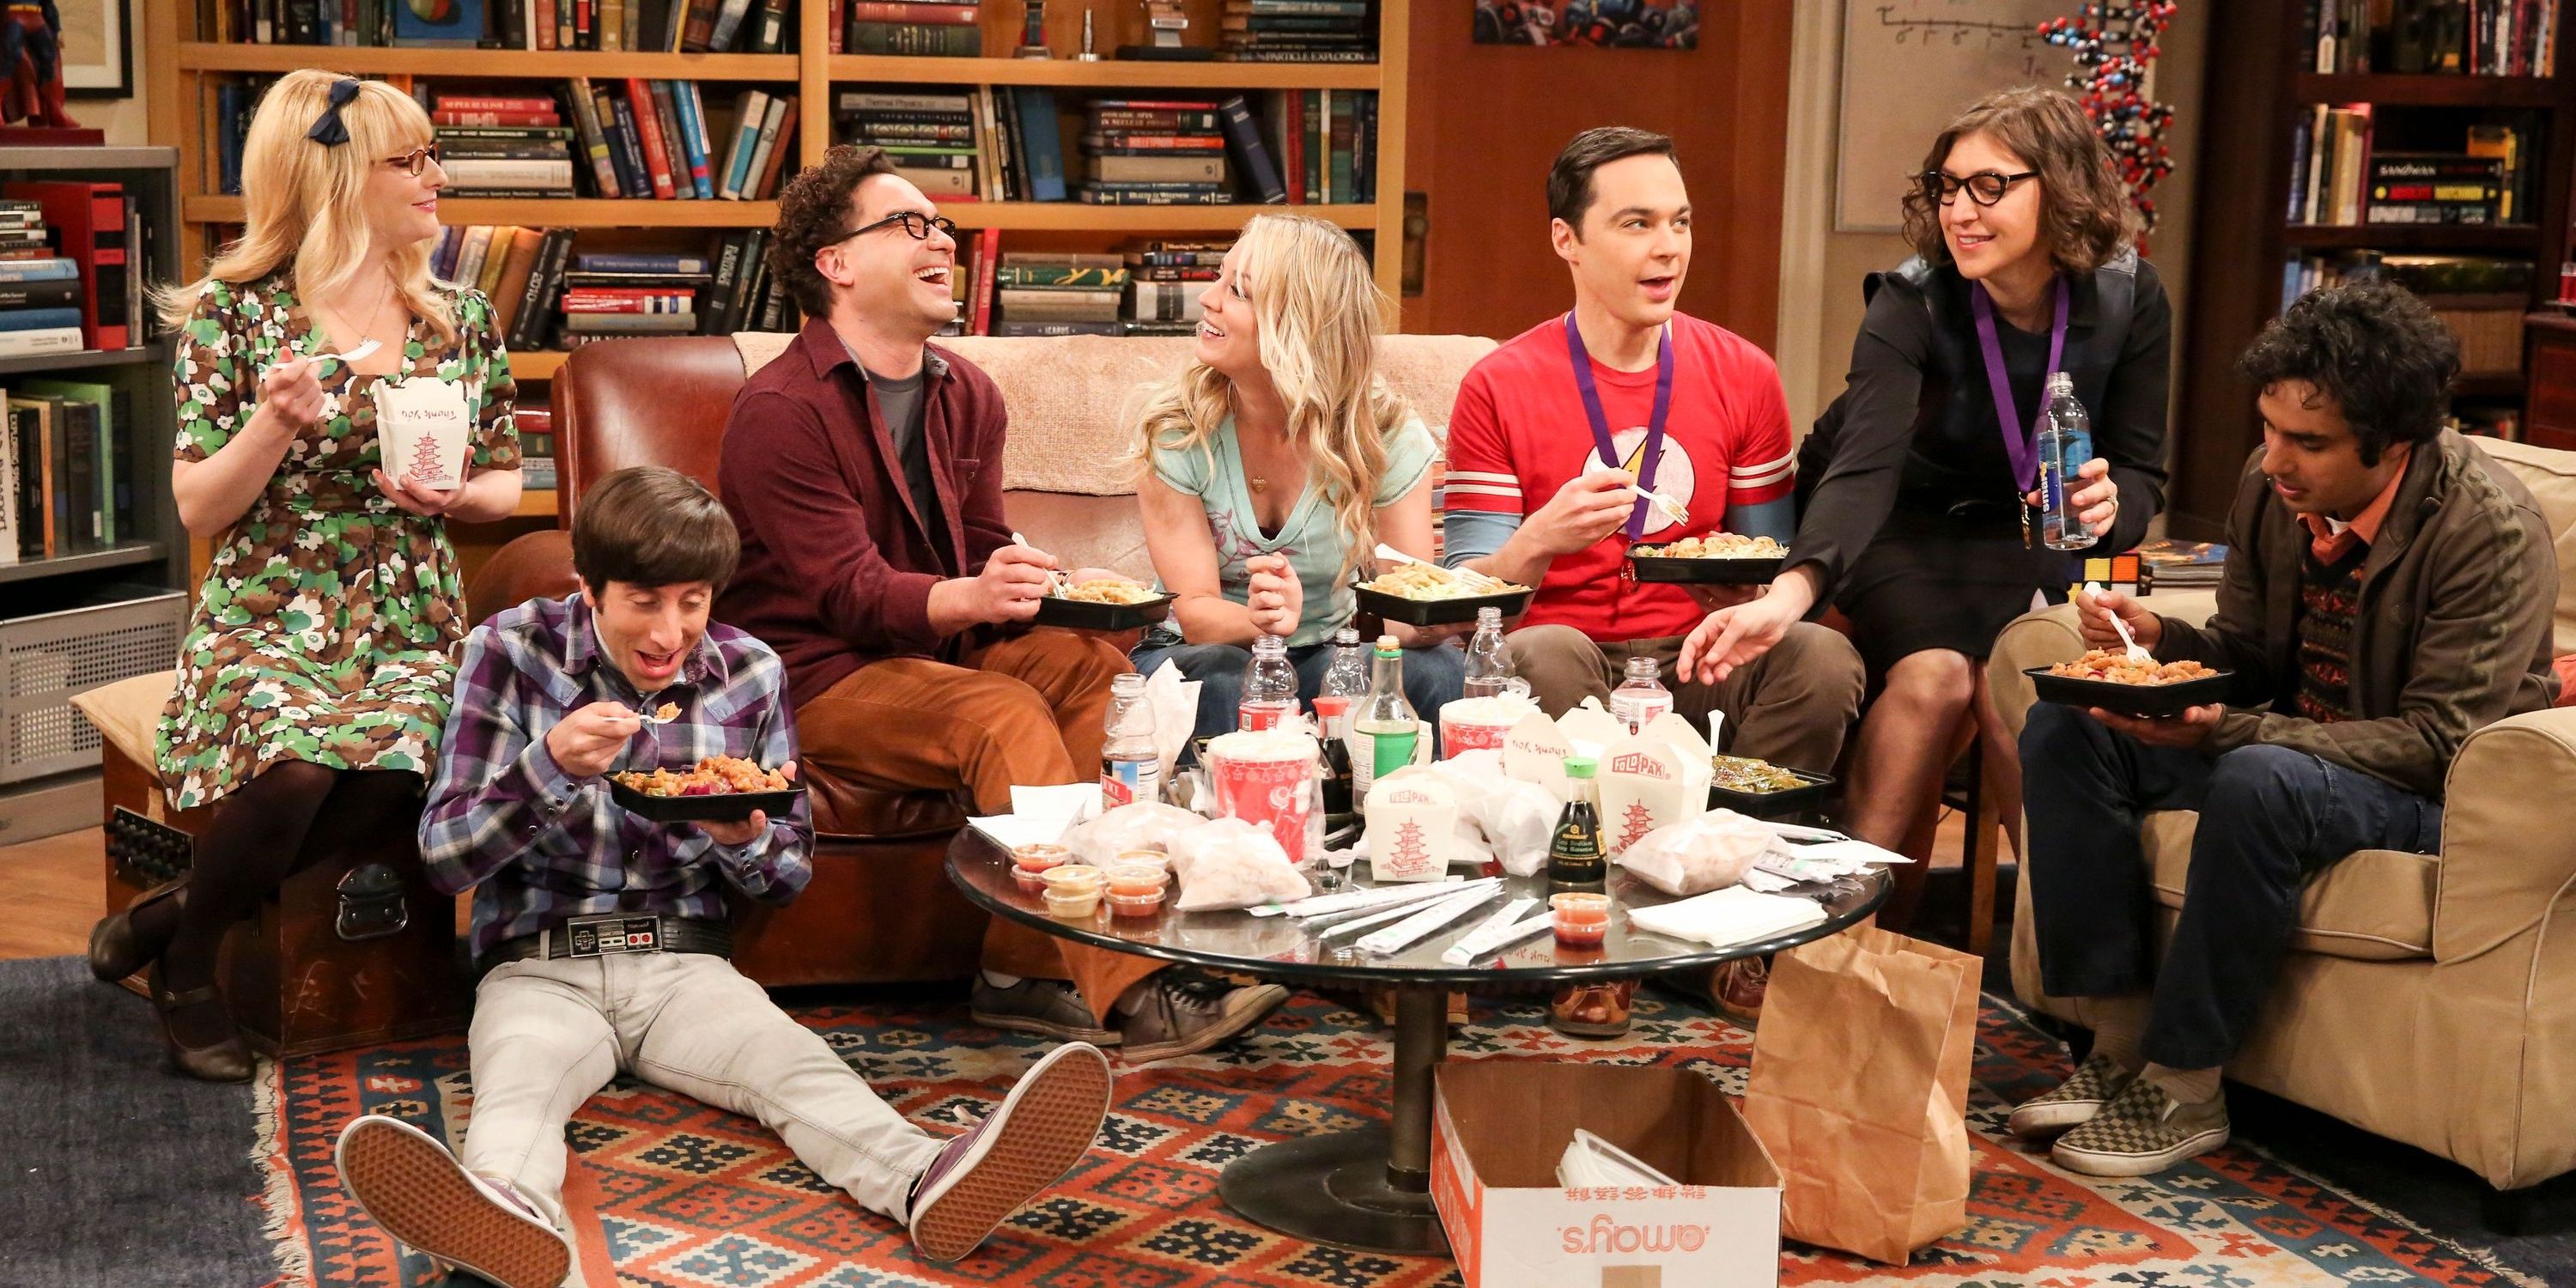 The final scene of the group eating lunch on TBBT